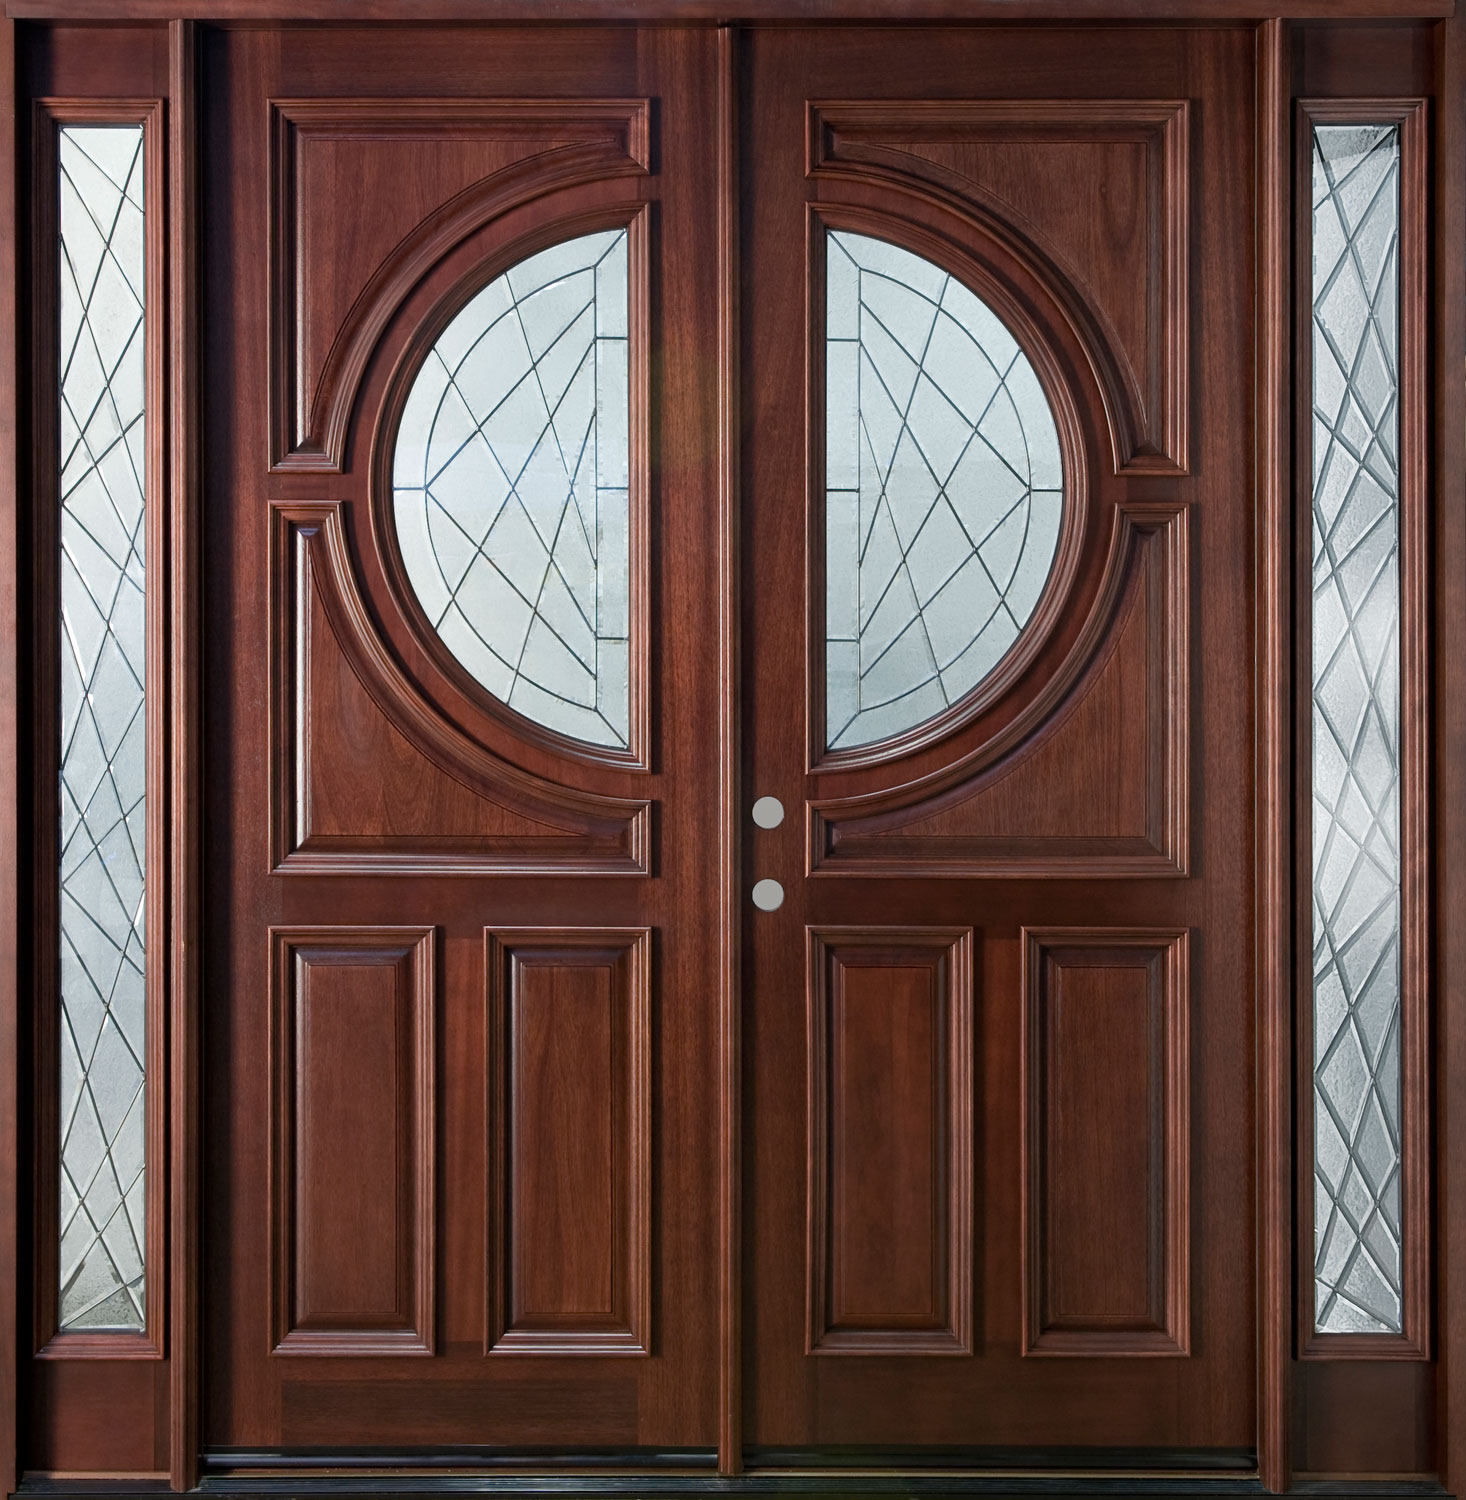 Custom Solid Wood Double Entry Door Design With Narrow Window And ...